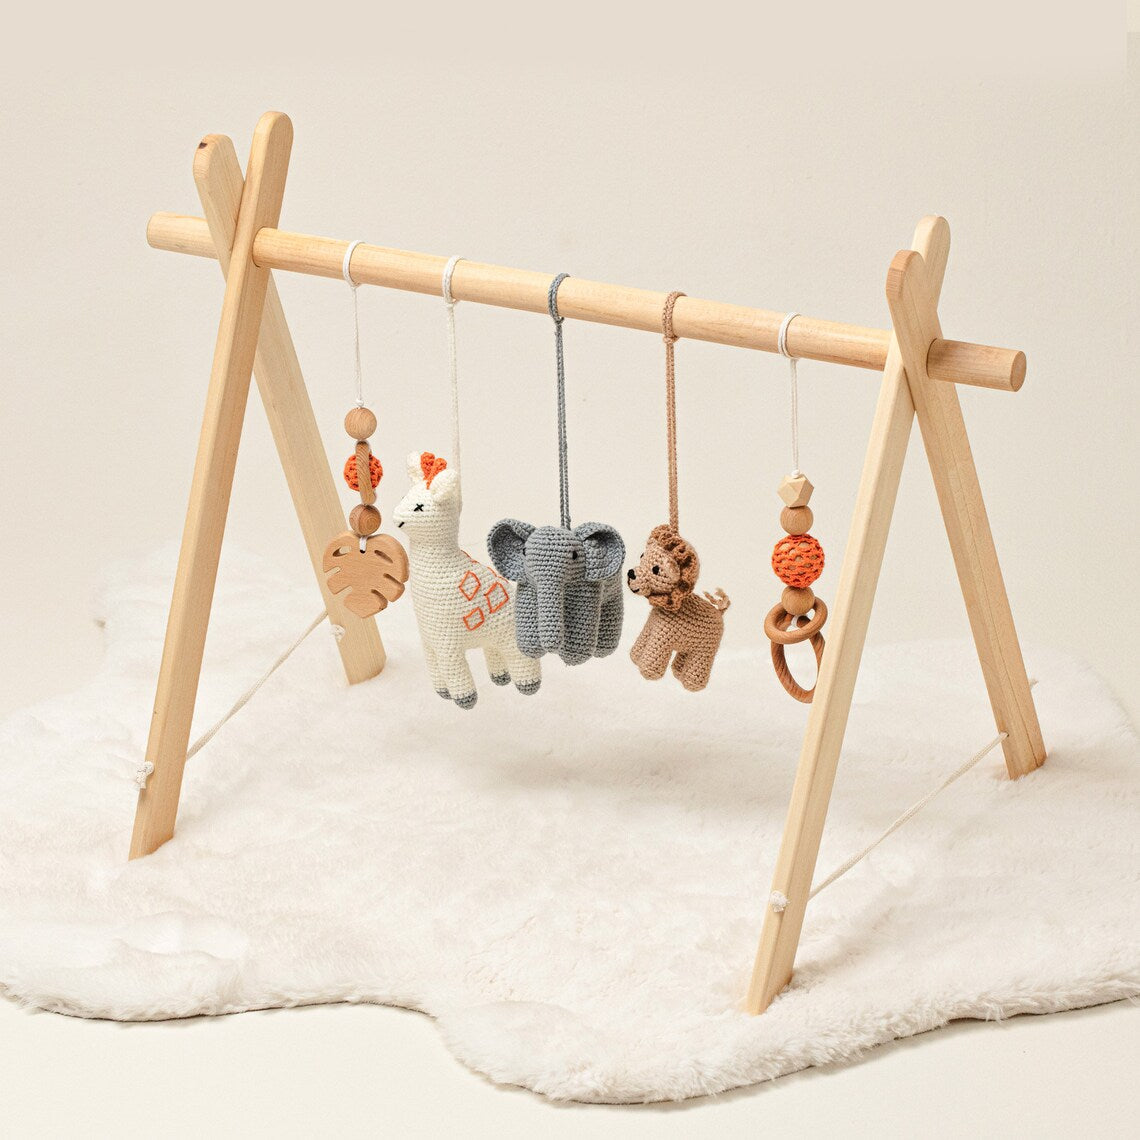 Safari Wooden Baby Gym / Eco Handmade Delight with Crocheted Hanging Toys